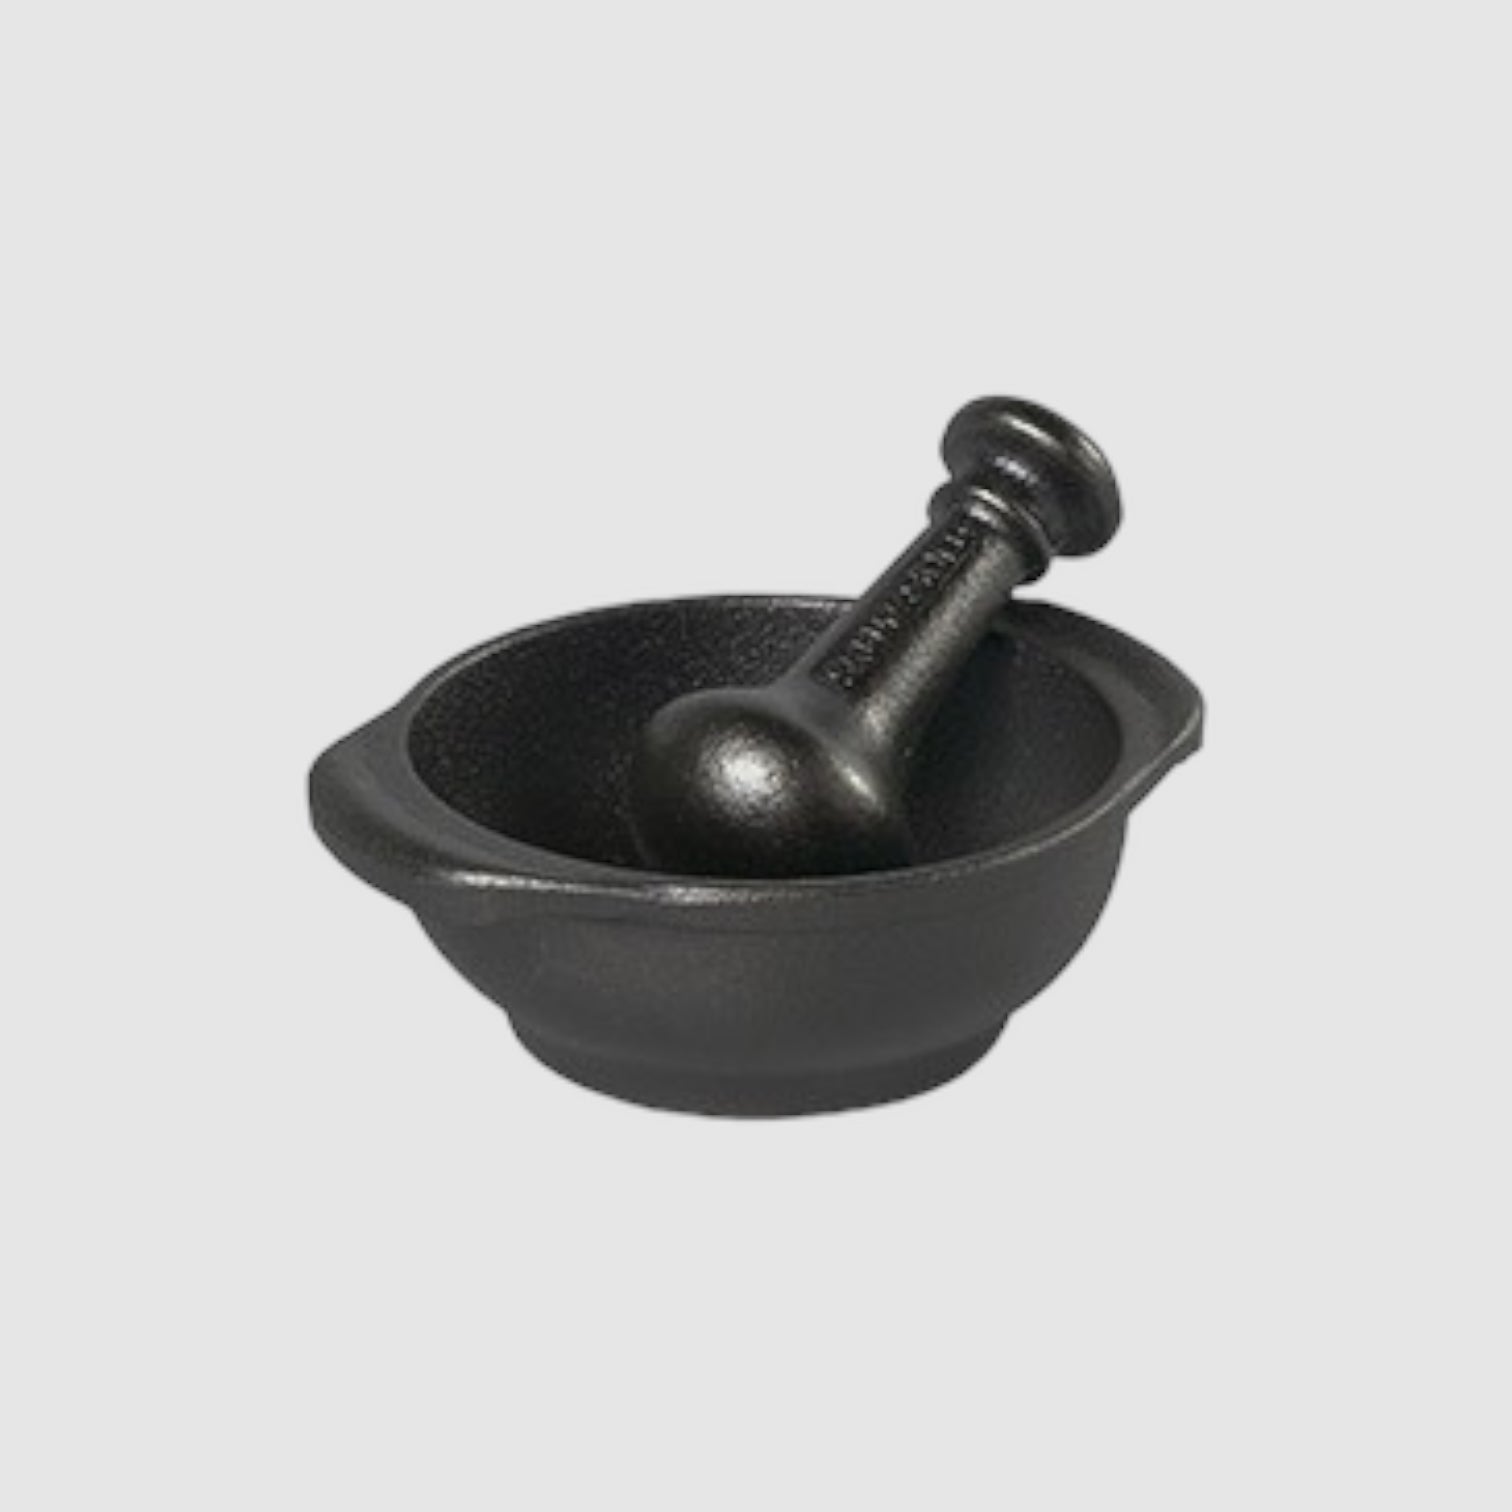 SKEPPSHULT MORTAR AND PESTLE // SMALL